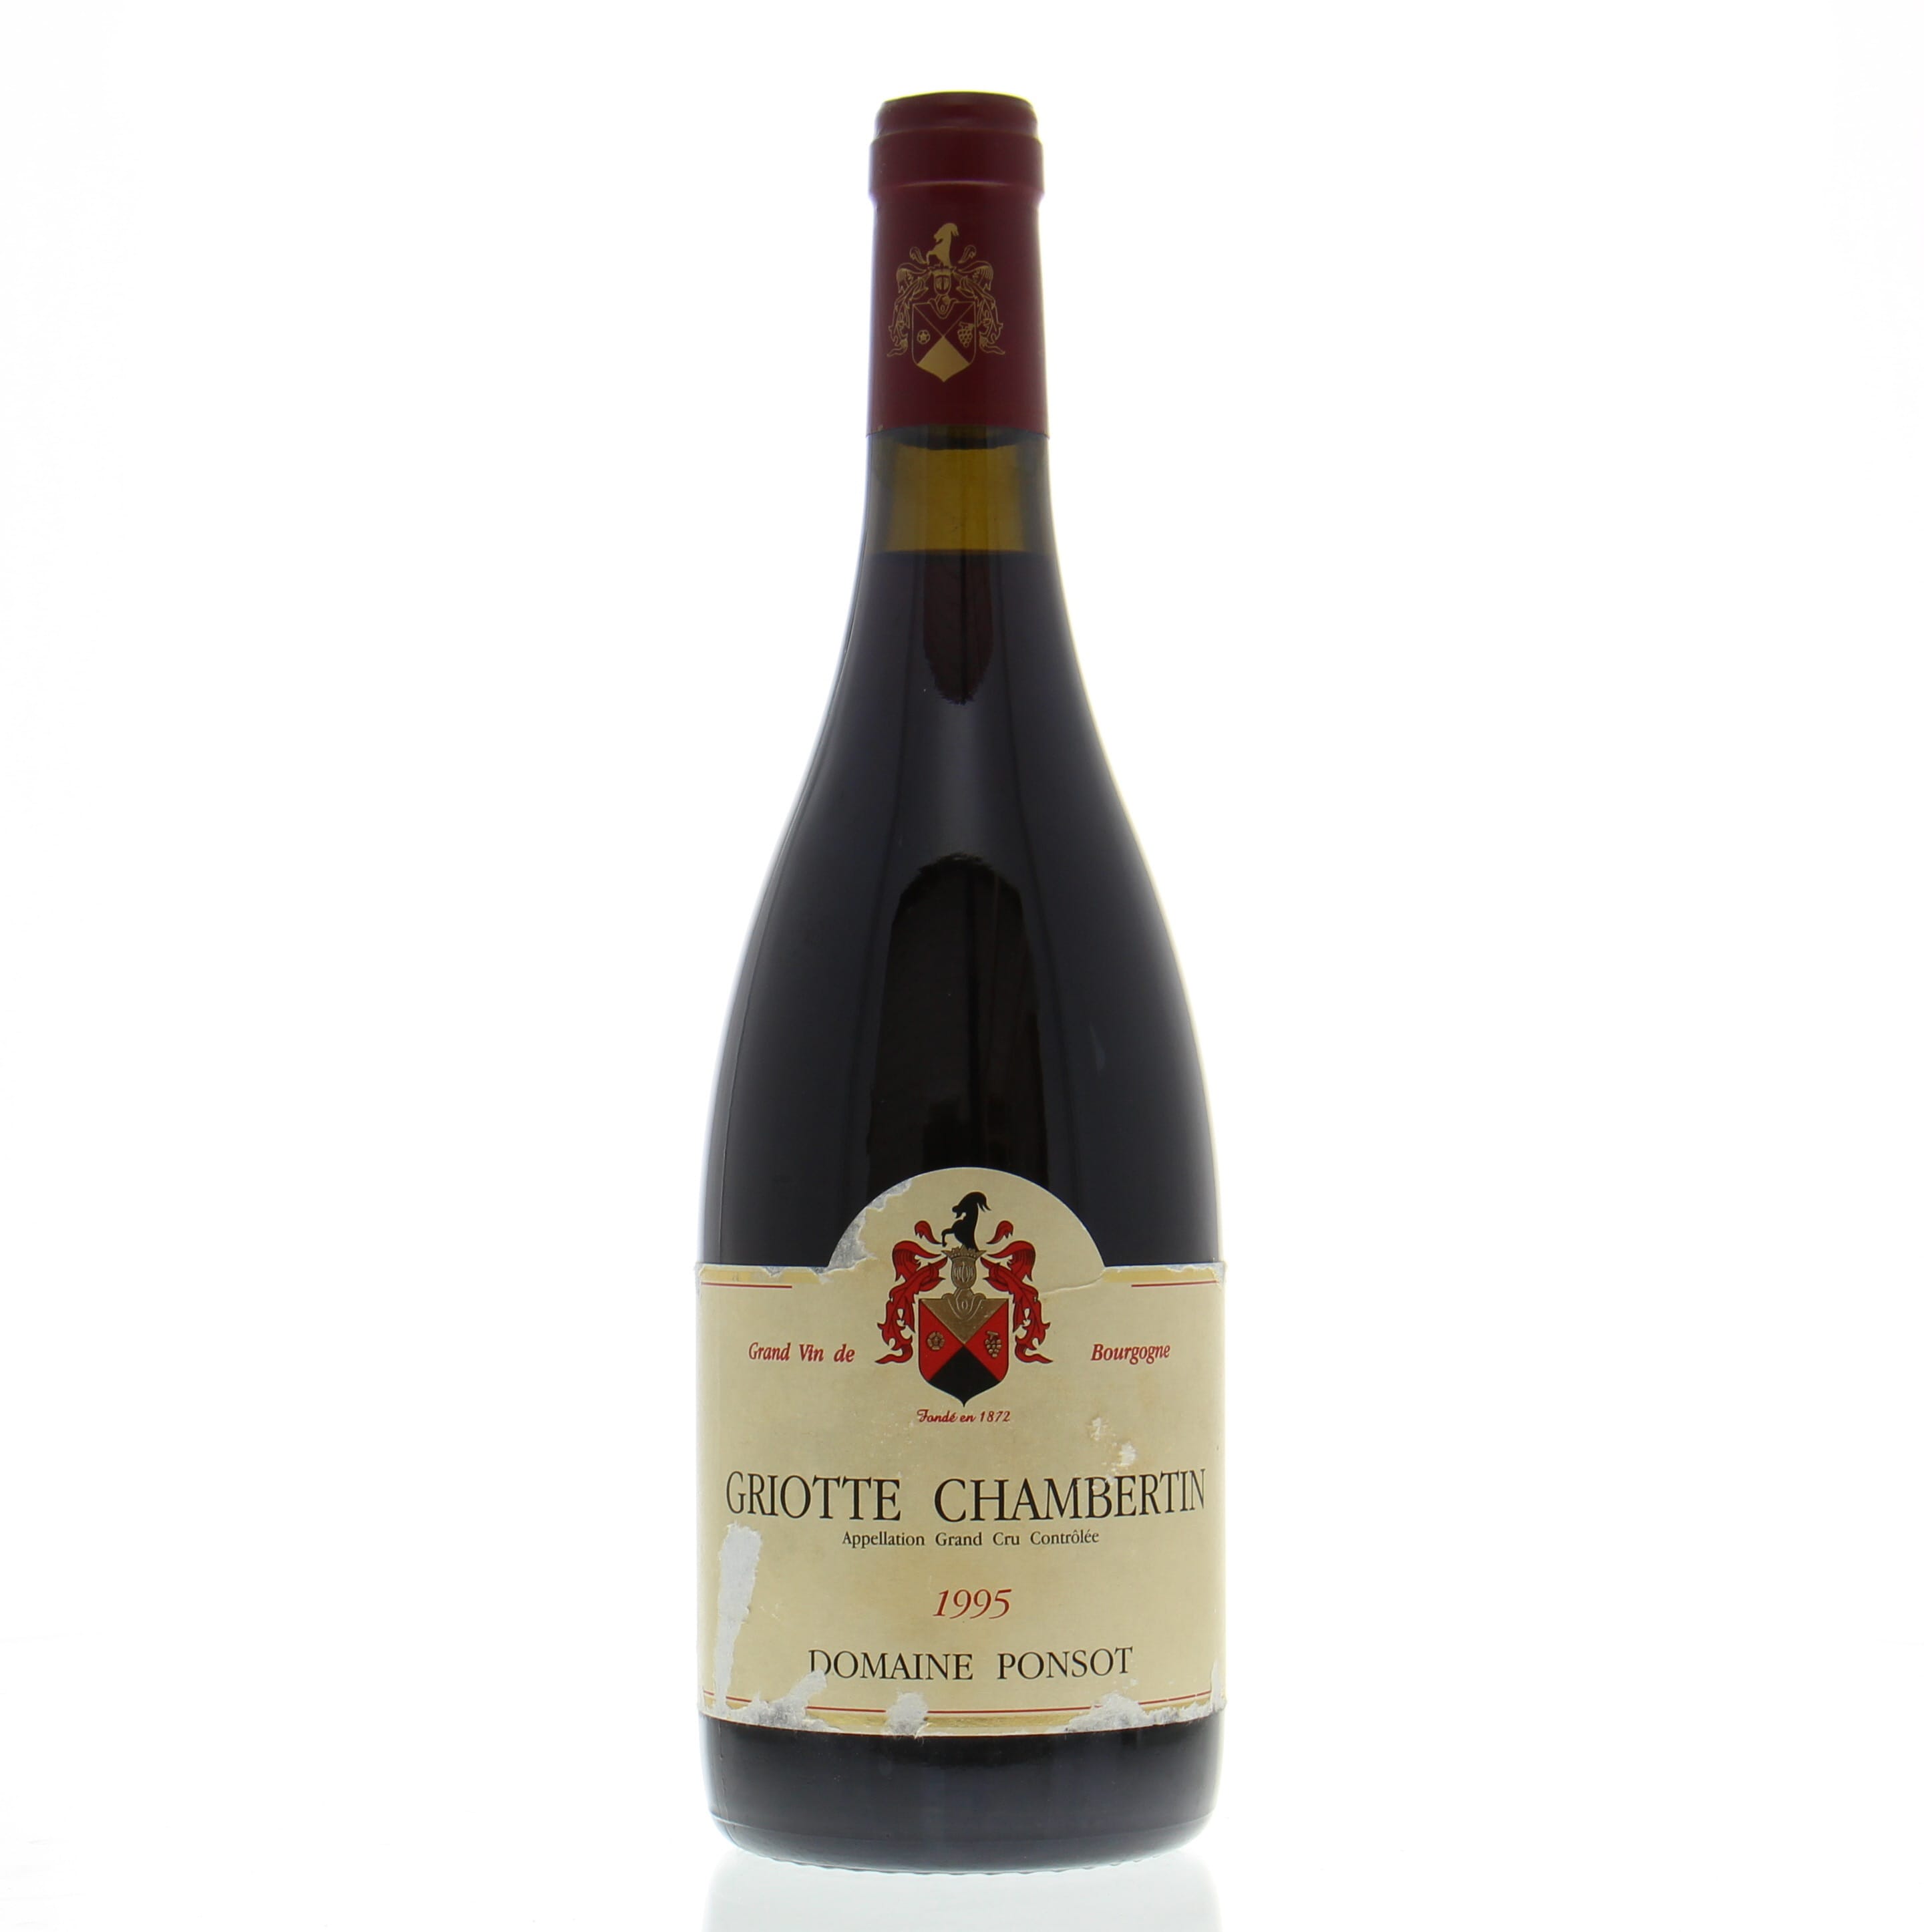 Domaine Ponsot - Griotte Chambertin 1995 Perfect